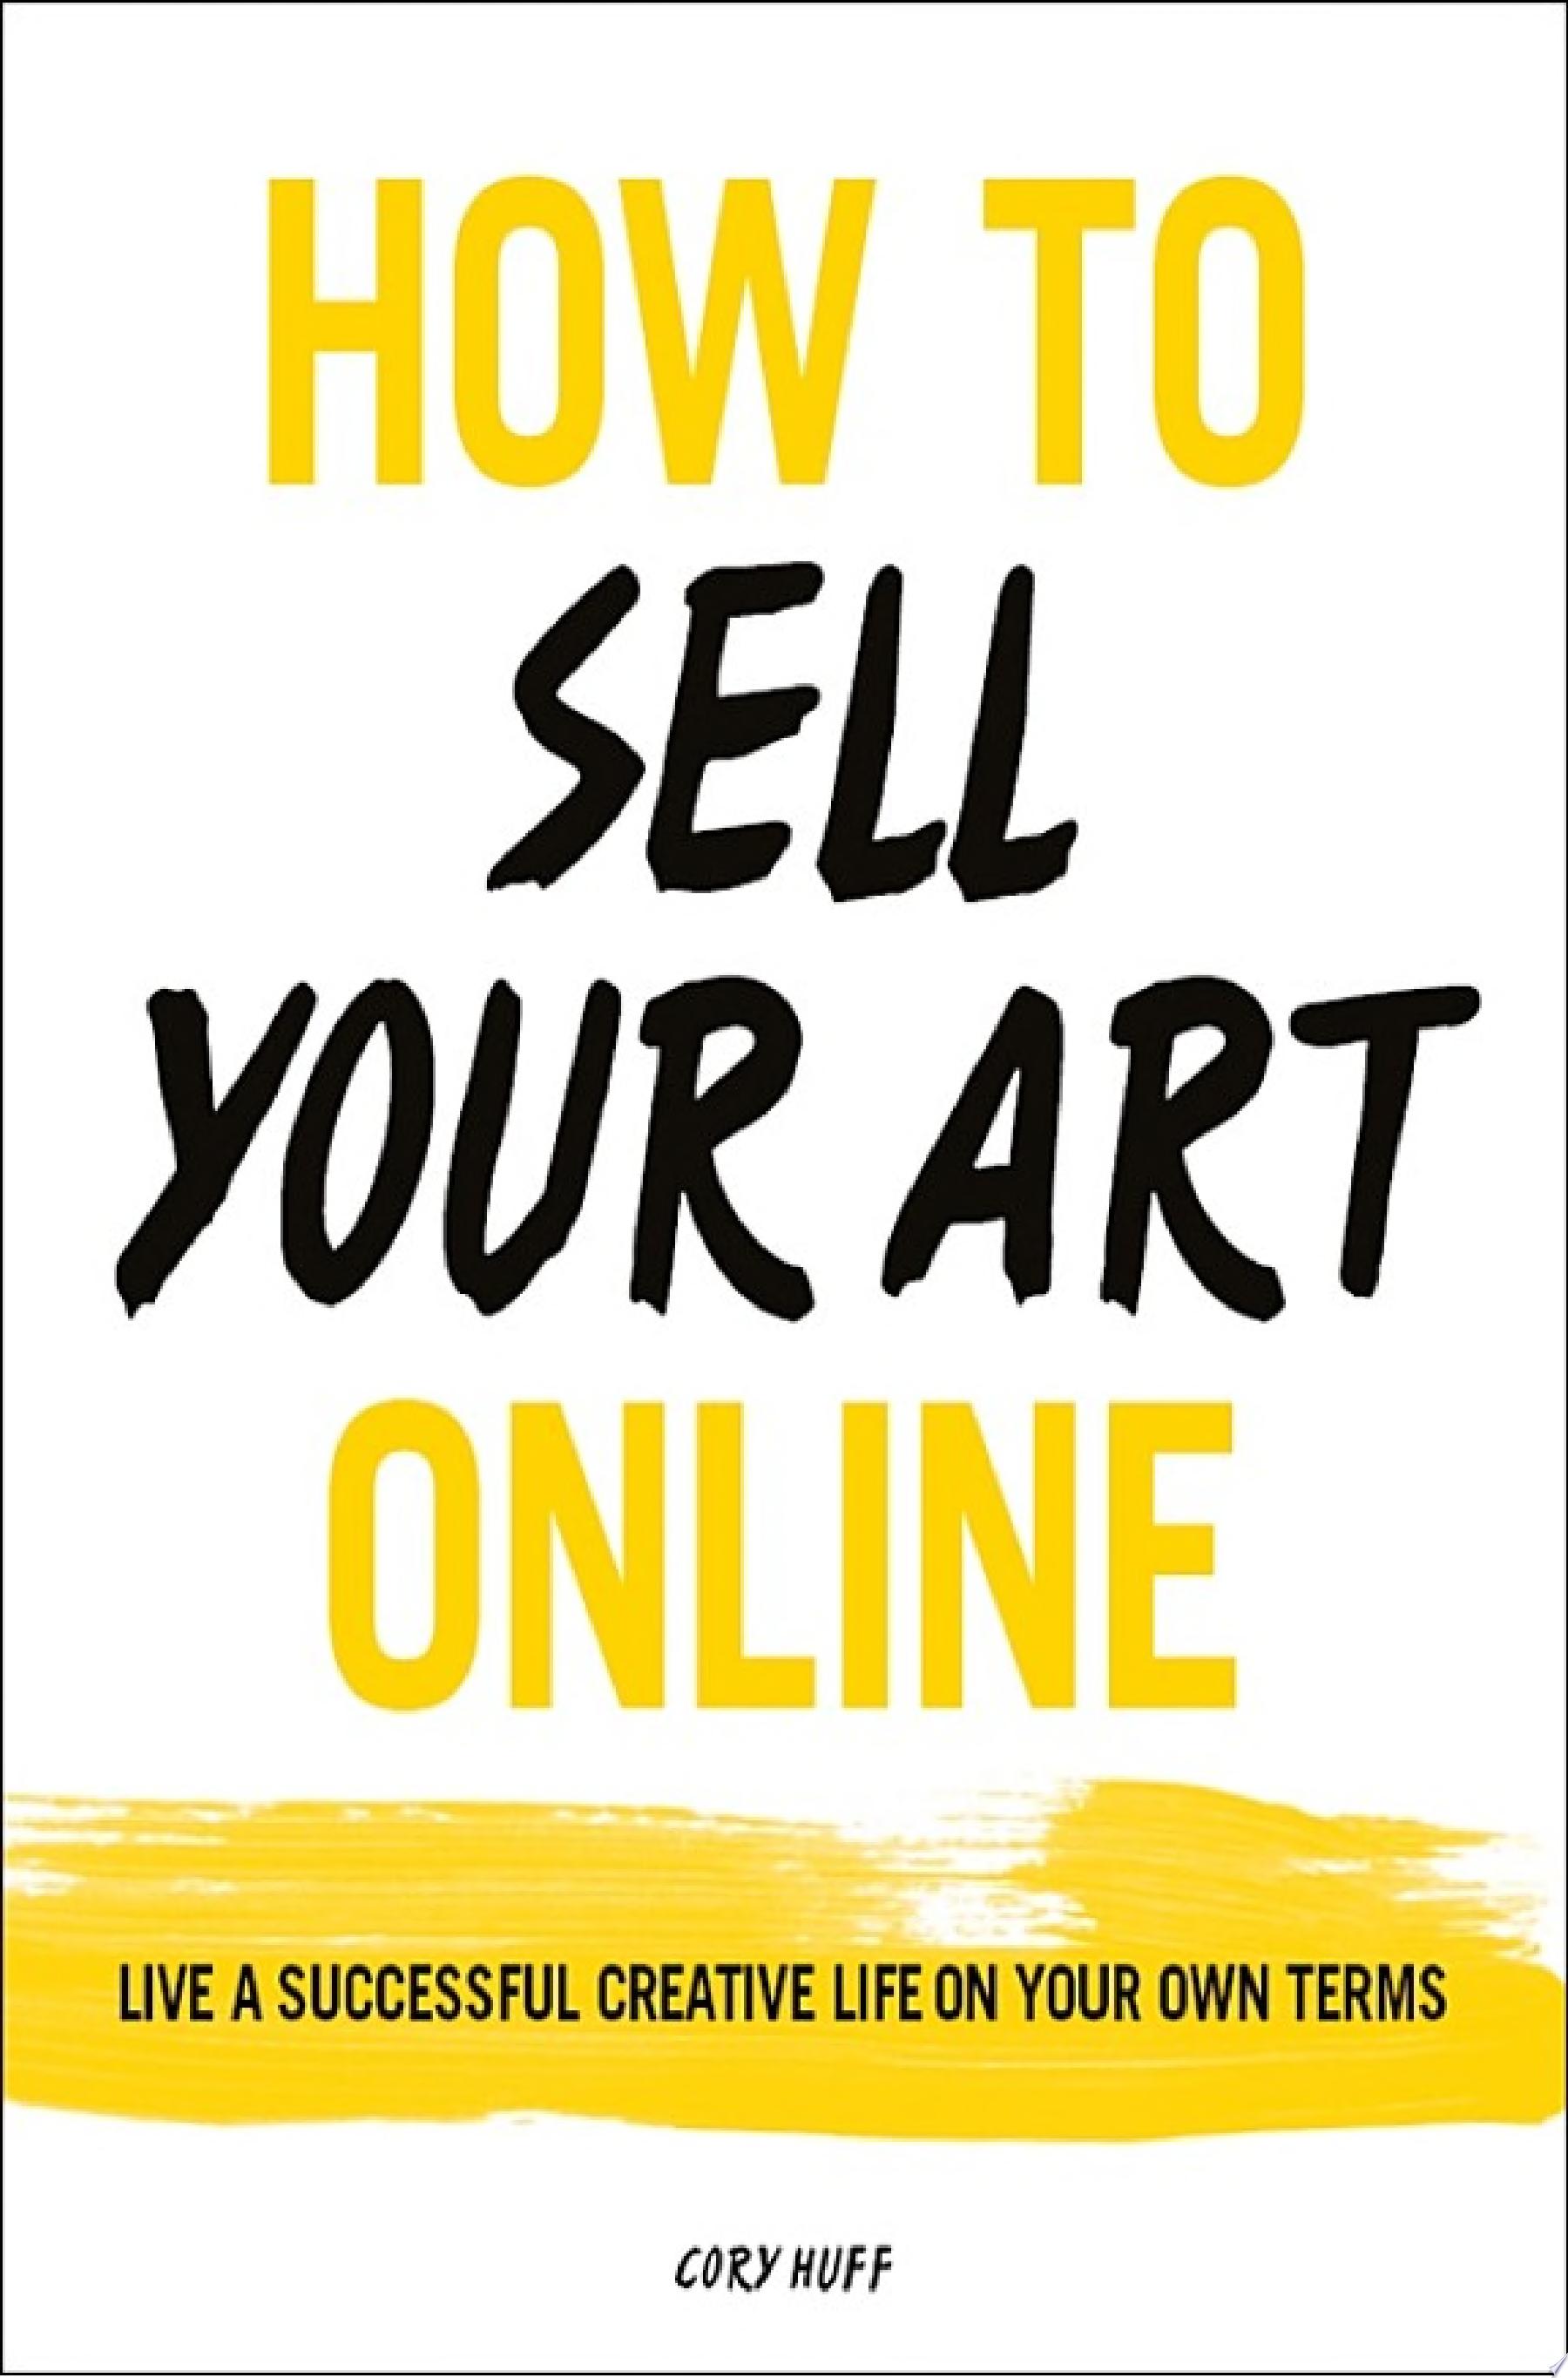 Image for "How to Sell Your Art Online"